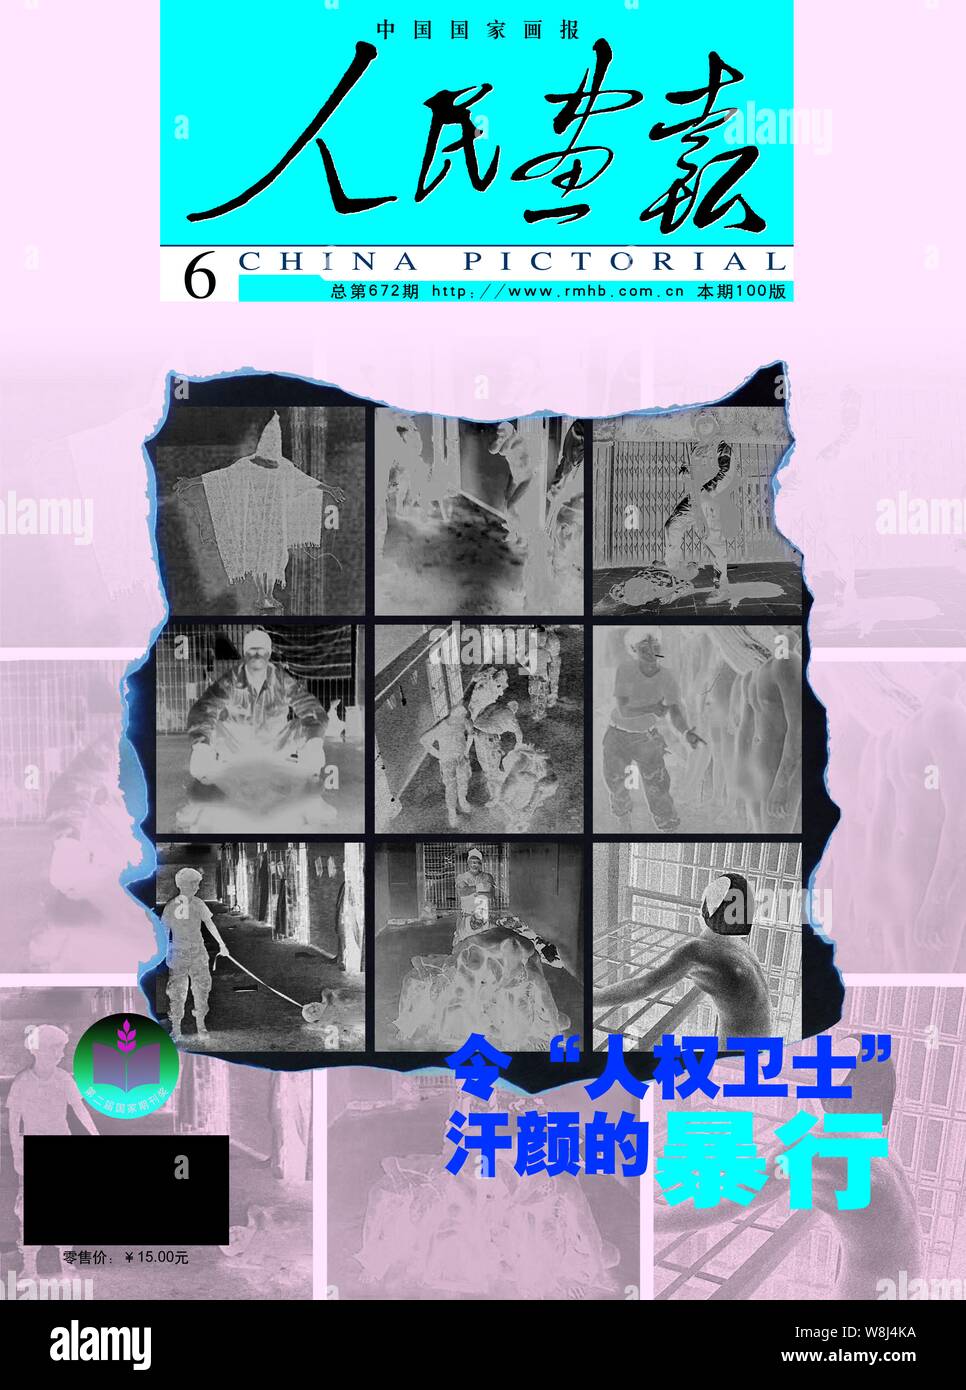 This cover of the China Pictorial issued in June 2004 features screenshots of Iraqi captures being abused by American soldiers in Abu Ghraib prison, I Stock Photo